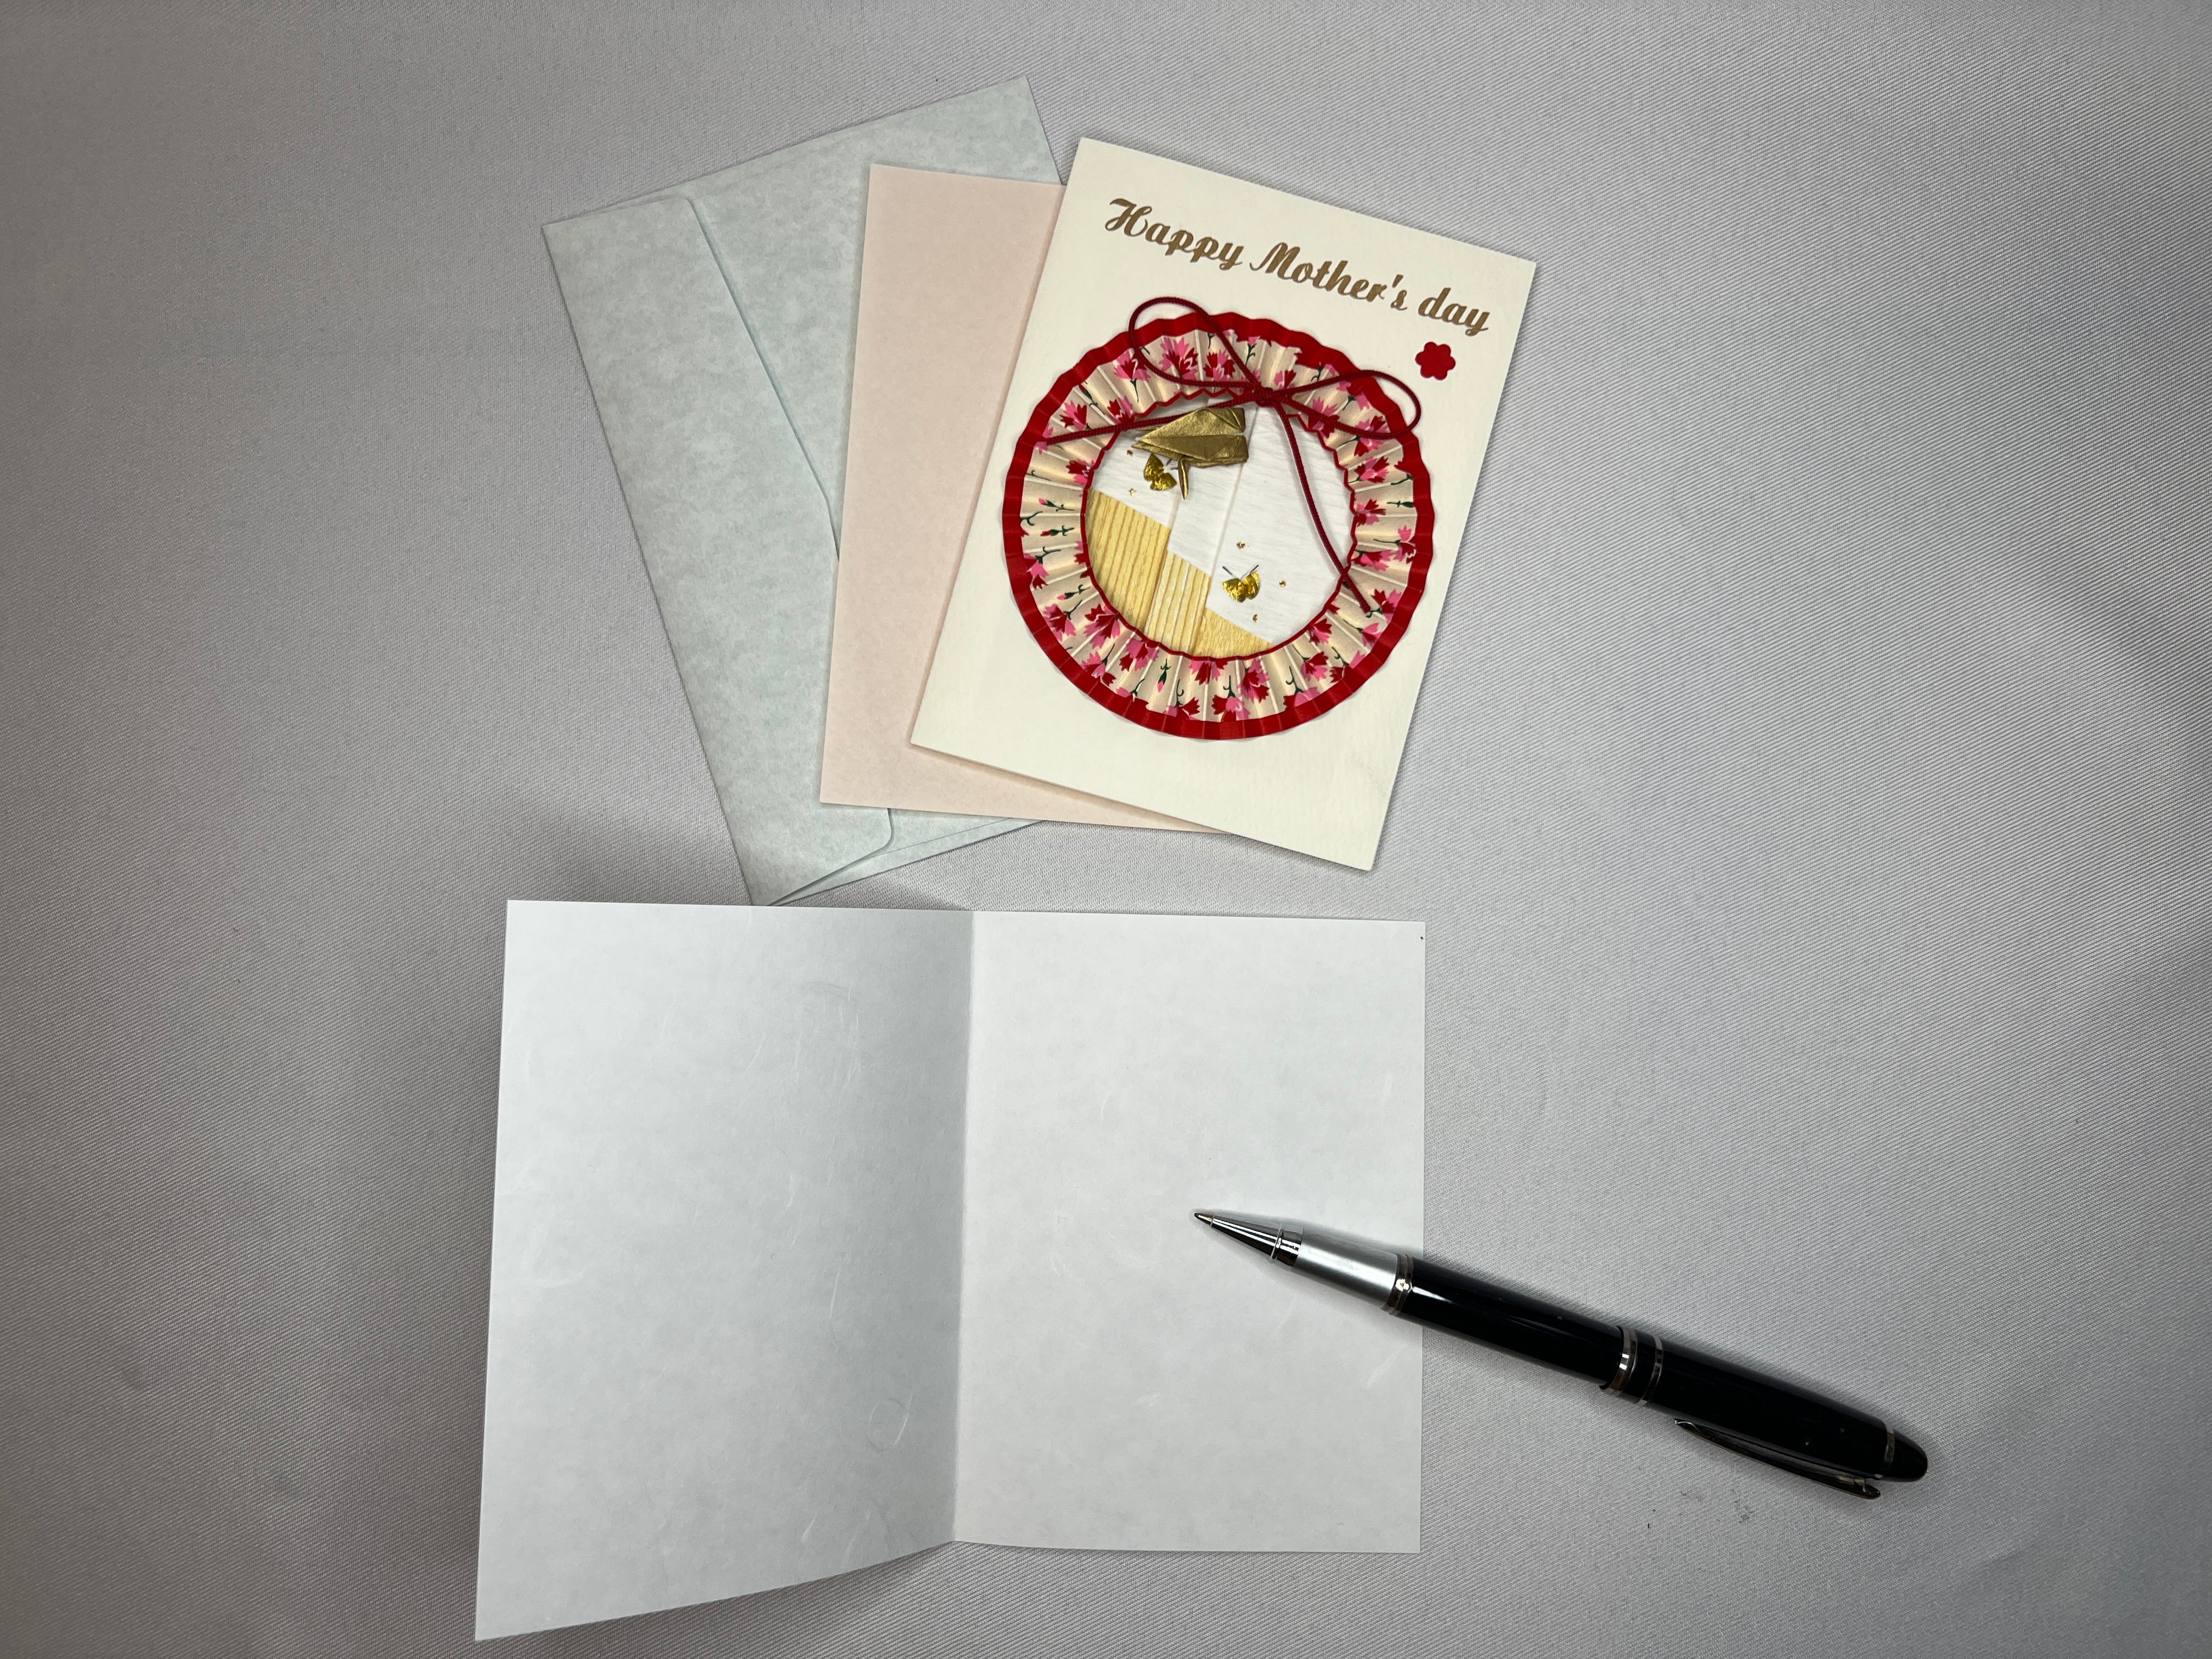 Handmade Greeting Card "Red Ring"(Mother's Day)